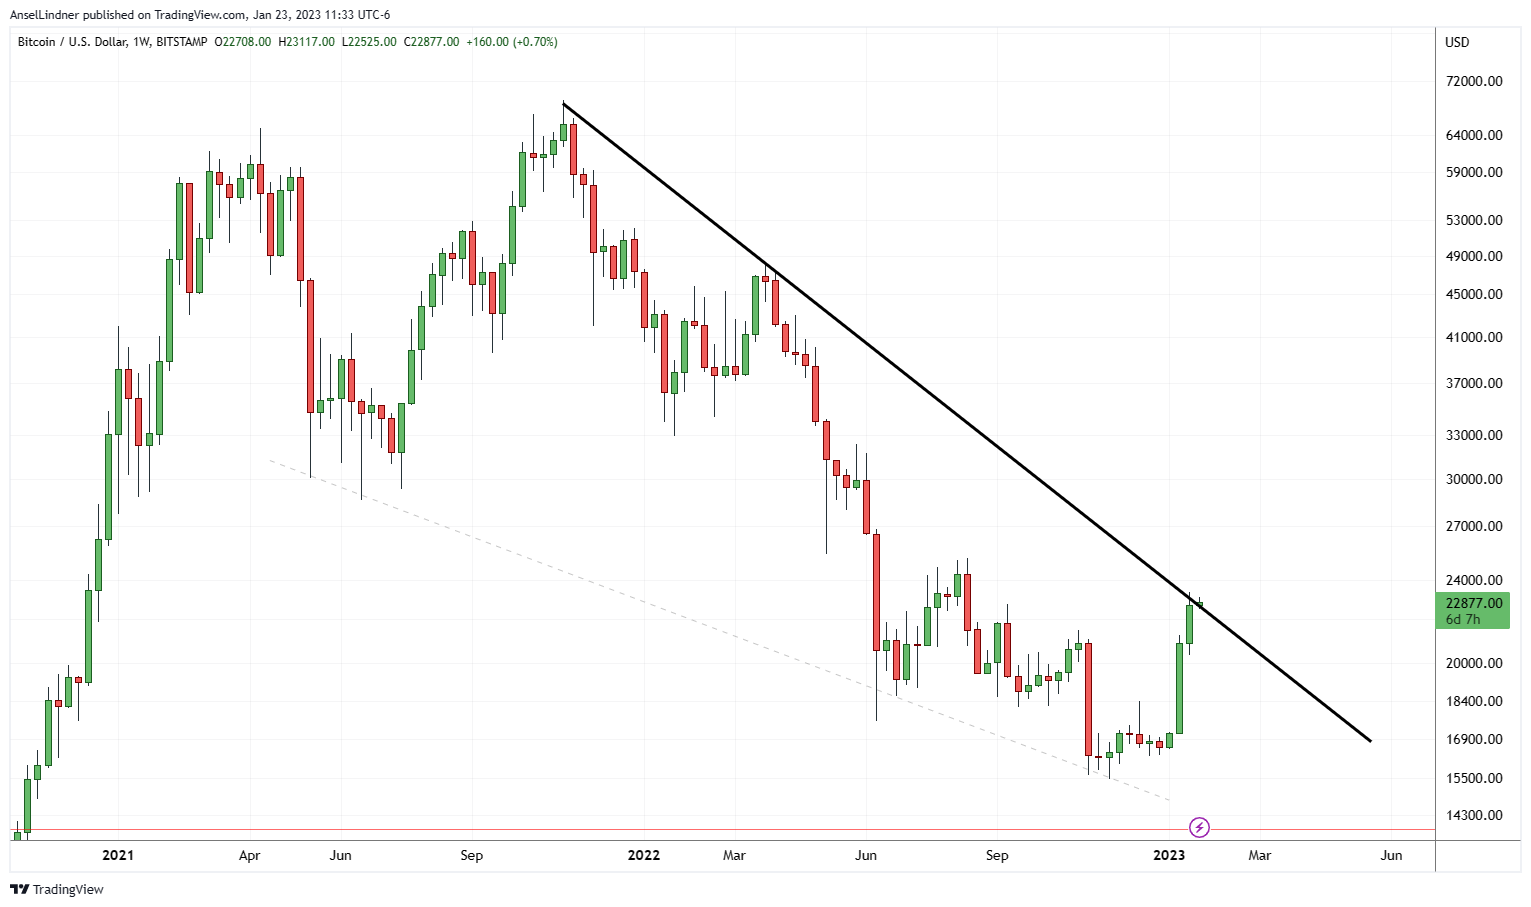 Bitcoin weekly chart with trend line